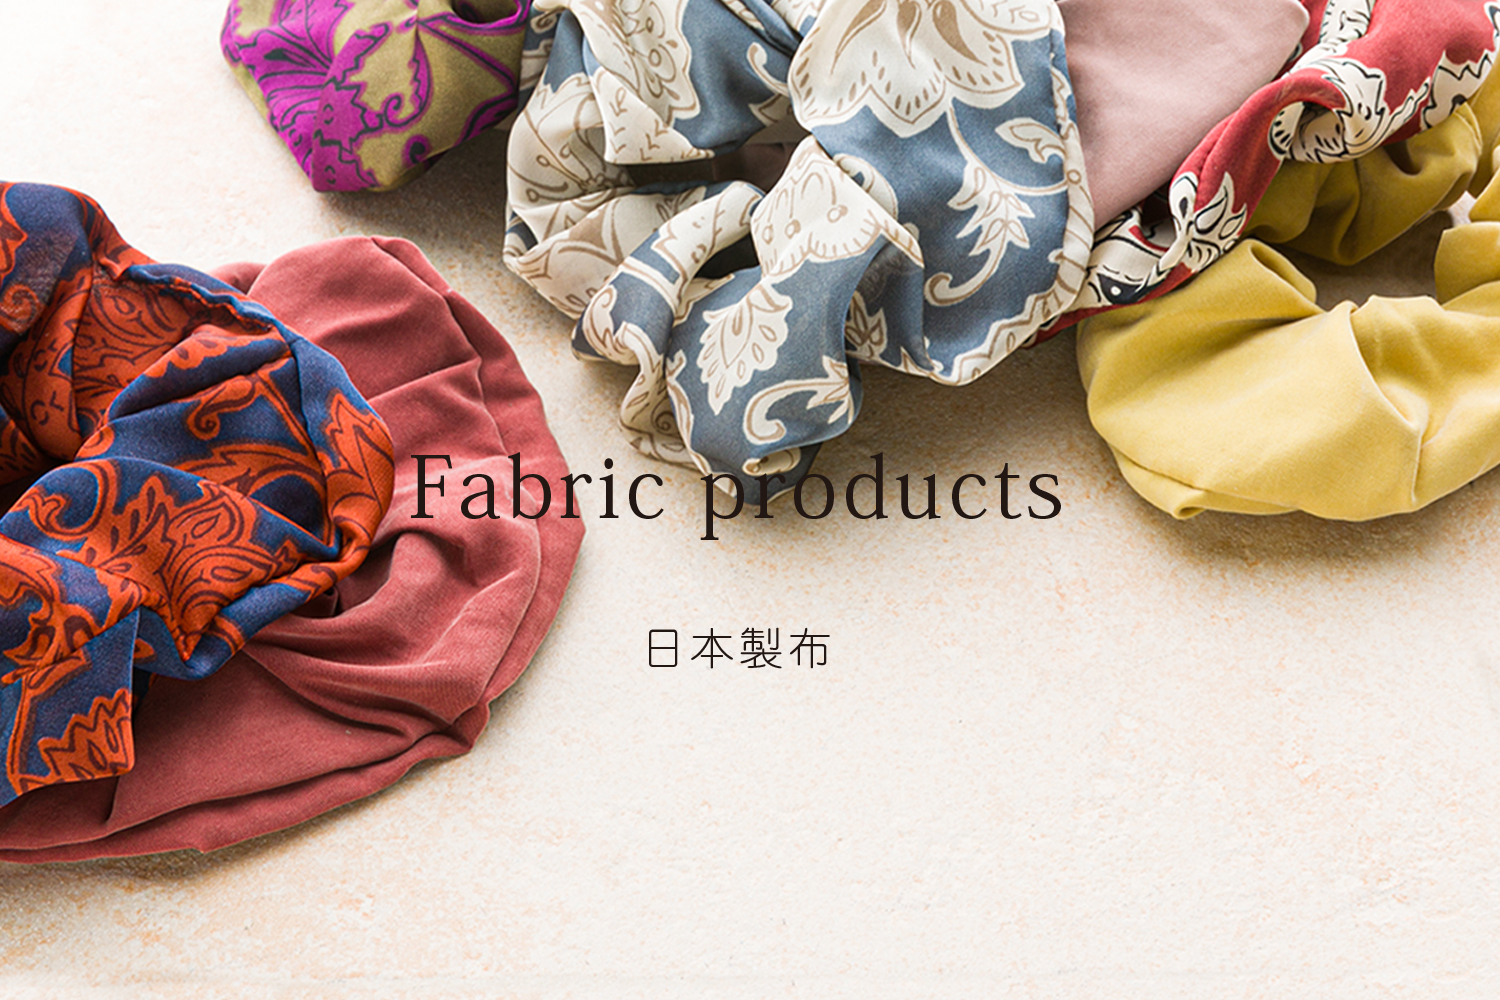 Fabric products